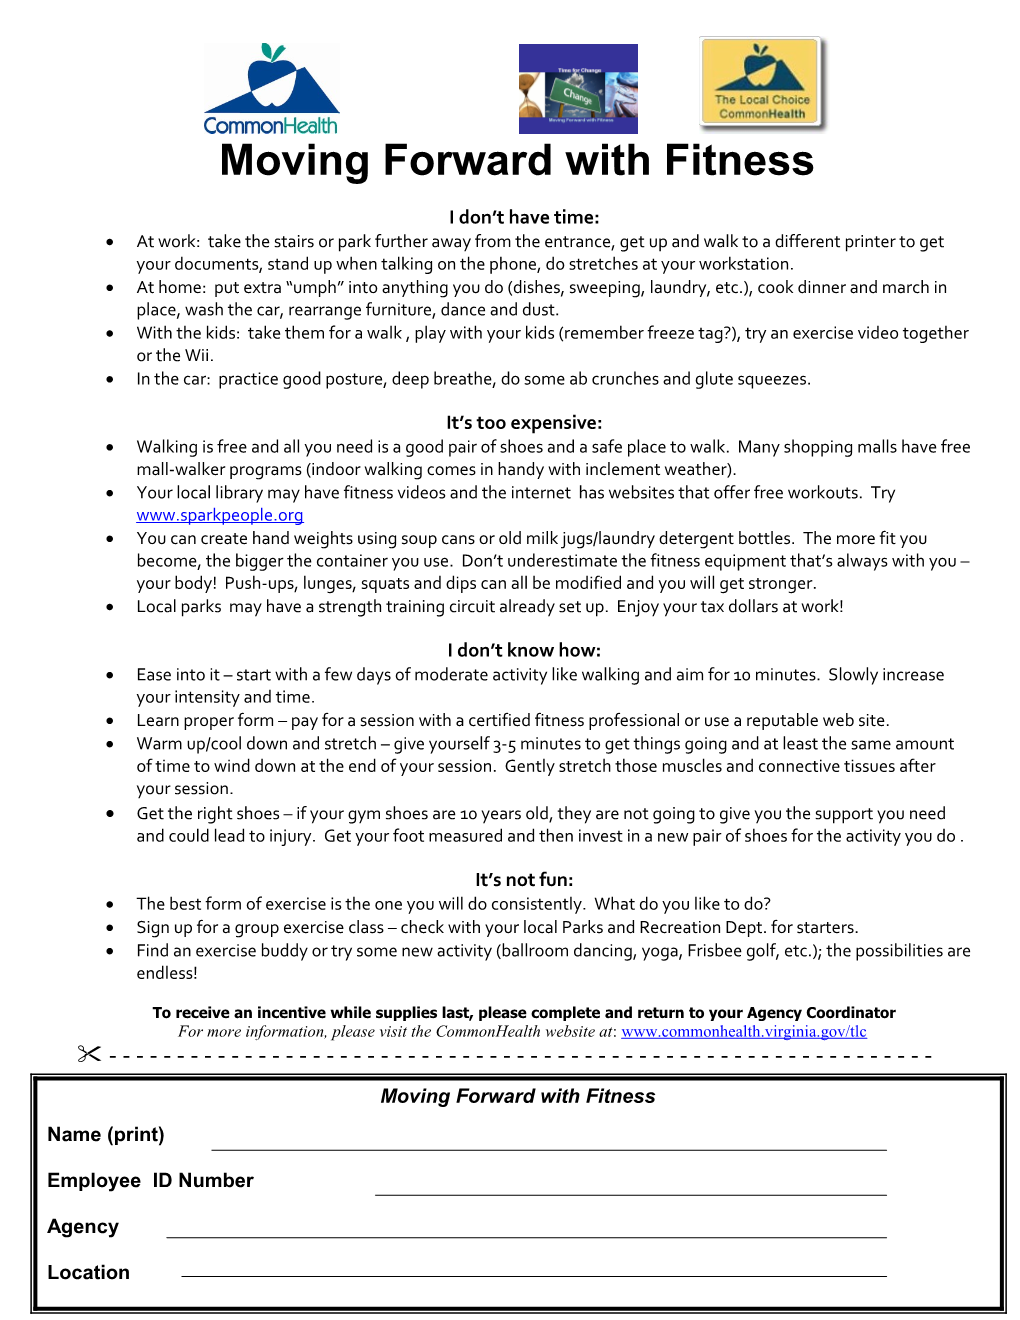 Moving Forward with Fitness